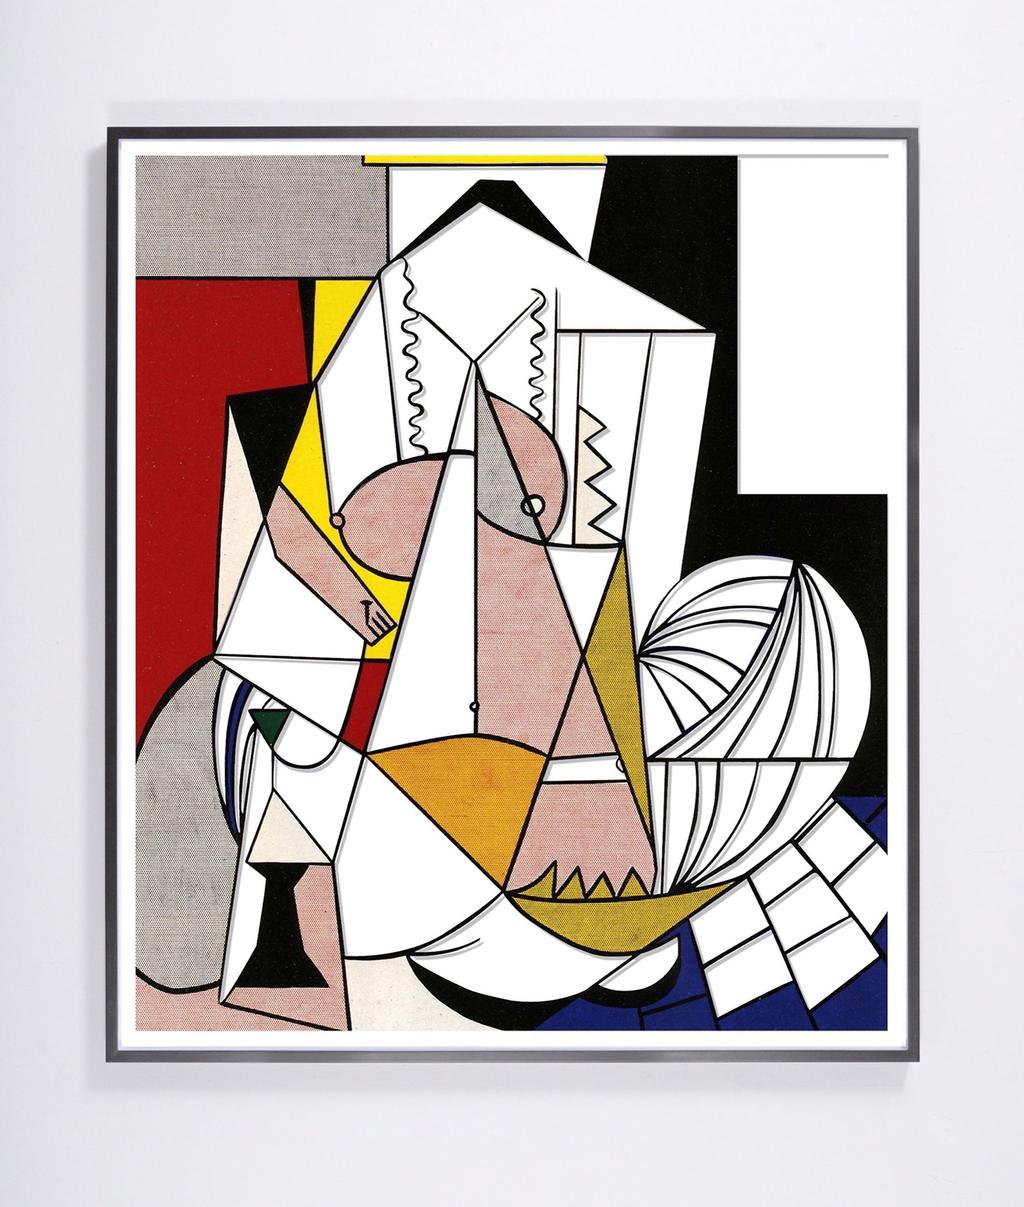 For your recent show at Sean Kelly, you produced a series of photographic cut-outs based on Roy Lichtenstein s Femme d Alger, which